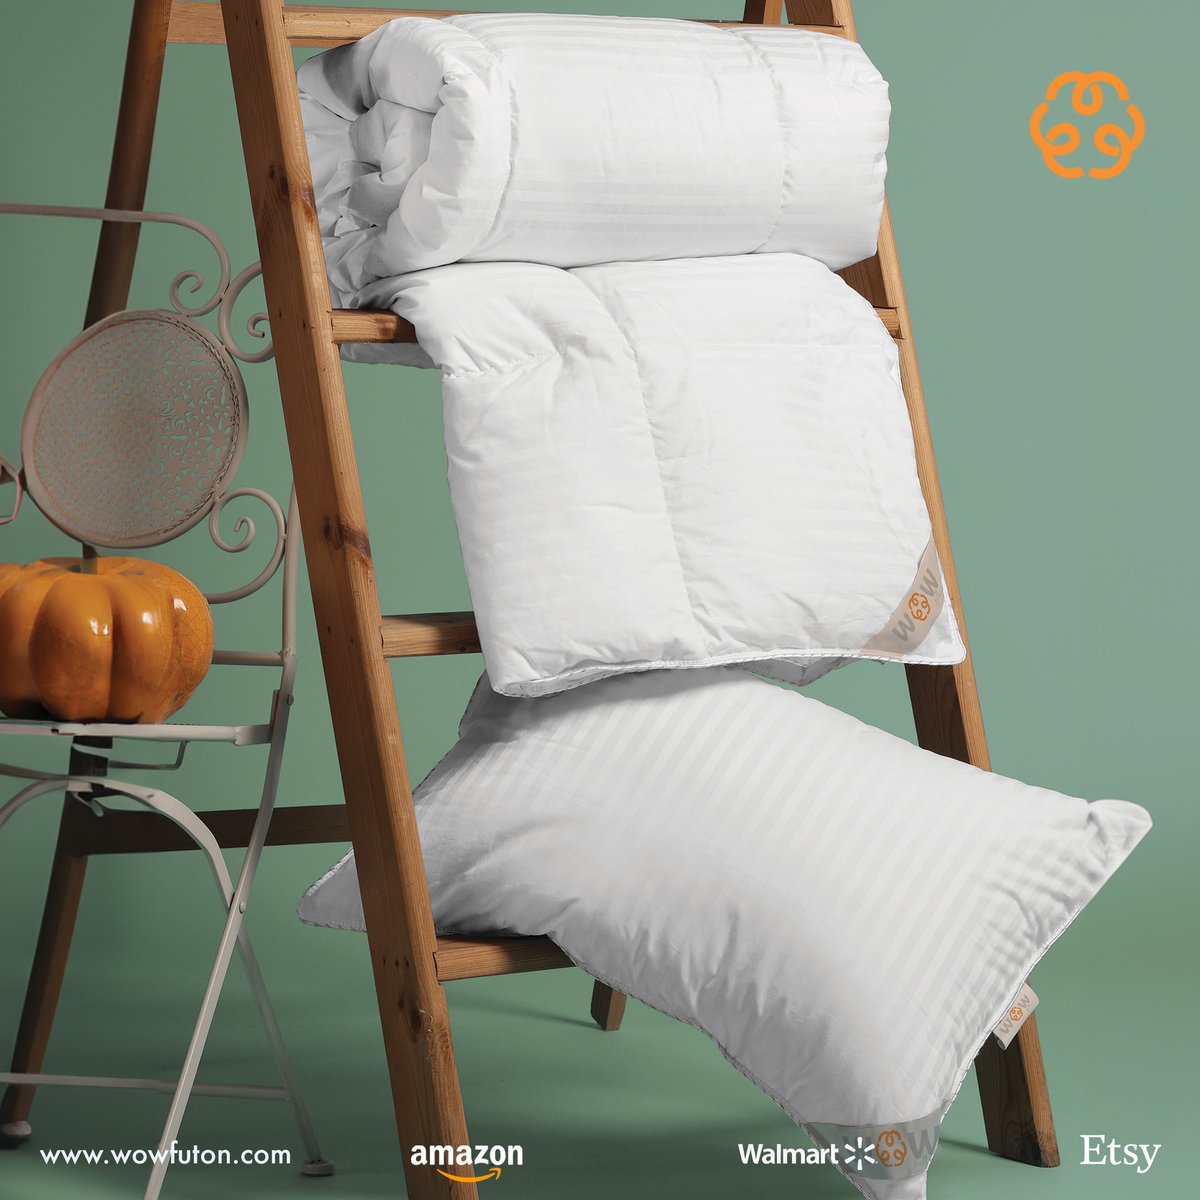 💤 WoW Futon organic comforters and pillows offer a cool and healthy sleeping experience with the breathable structure of its 100% wool fabric.

🧡 Discover naturalness at WoWFuton.com

#wowfuton
#pillow
#comforter
#merinowool
#alpacawool
#organicbedding
#sleepwell